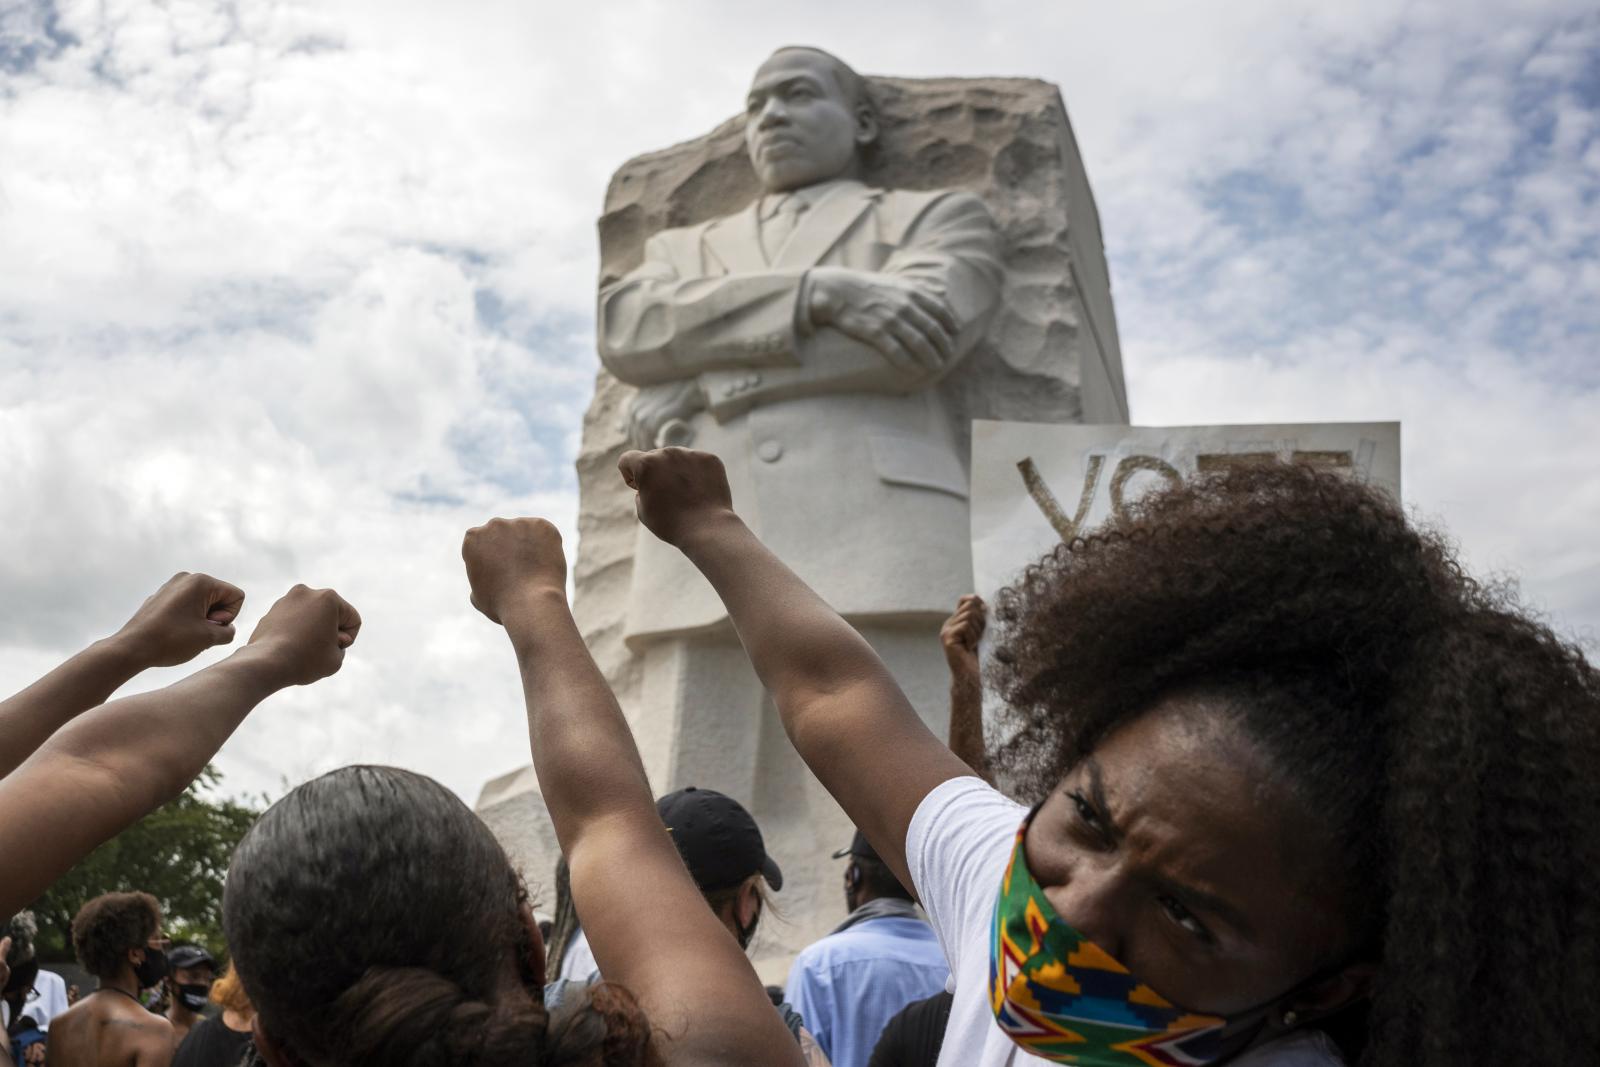 Black women raise their fists i... previous civil rights leaders.